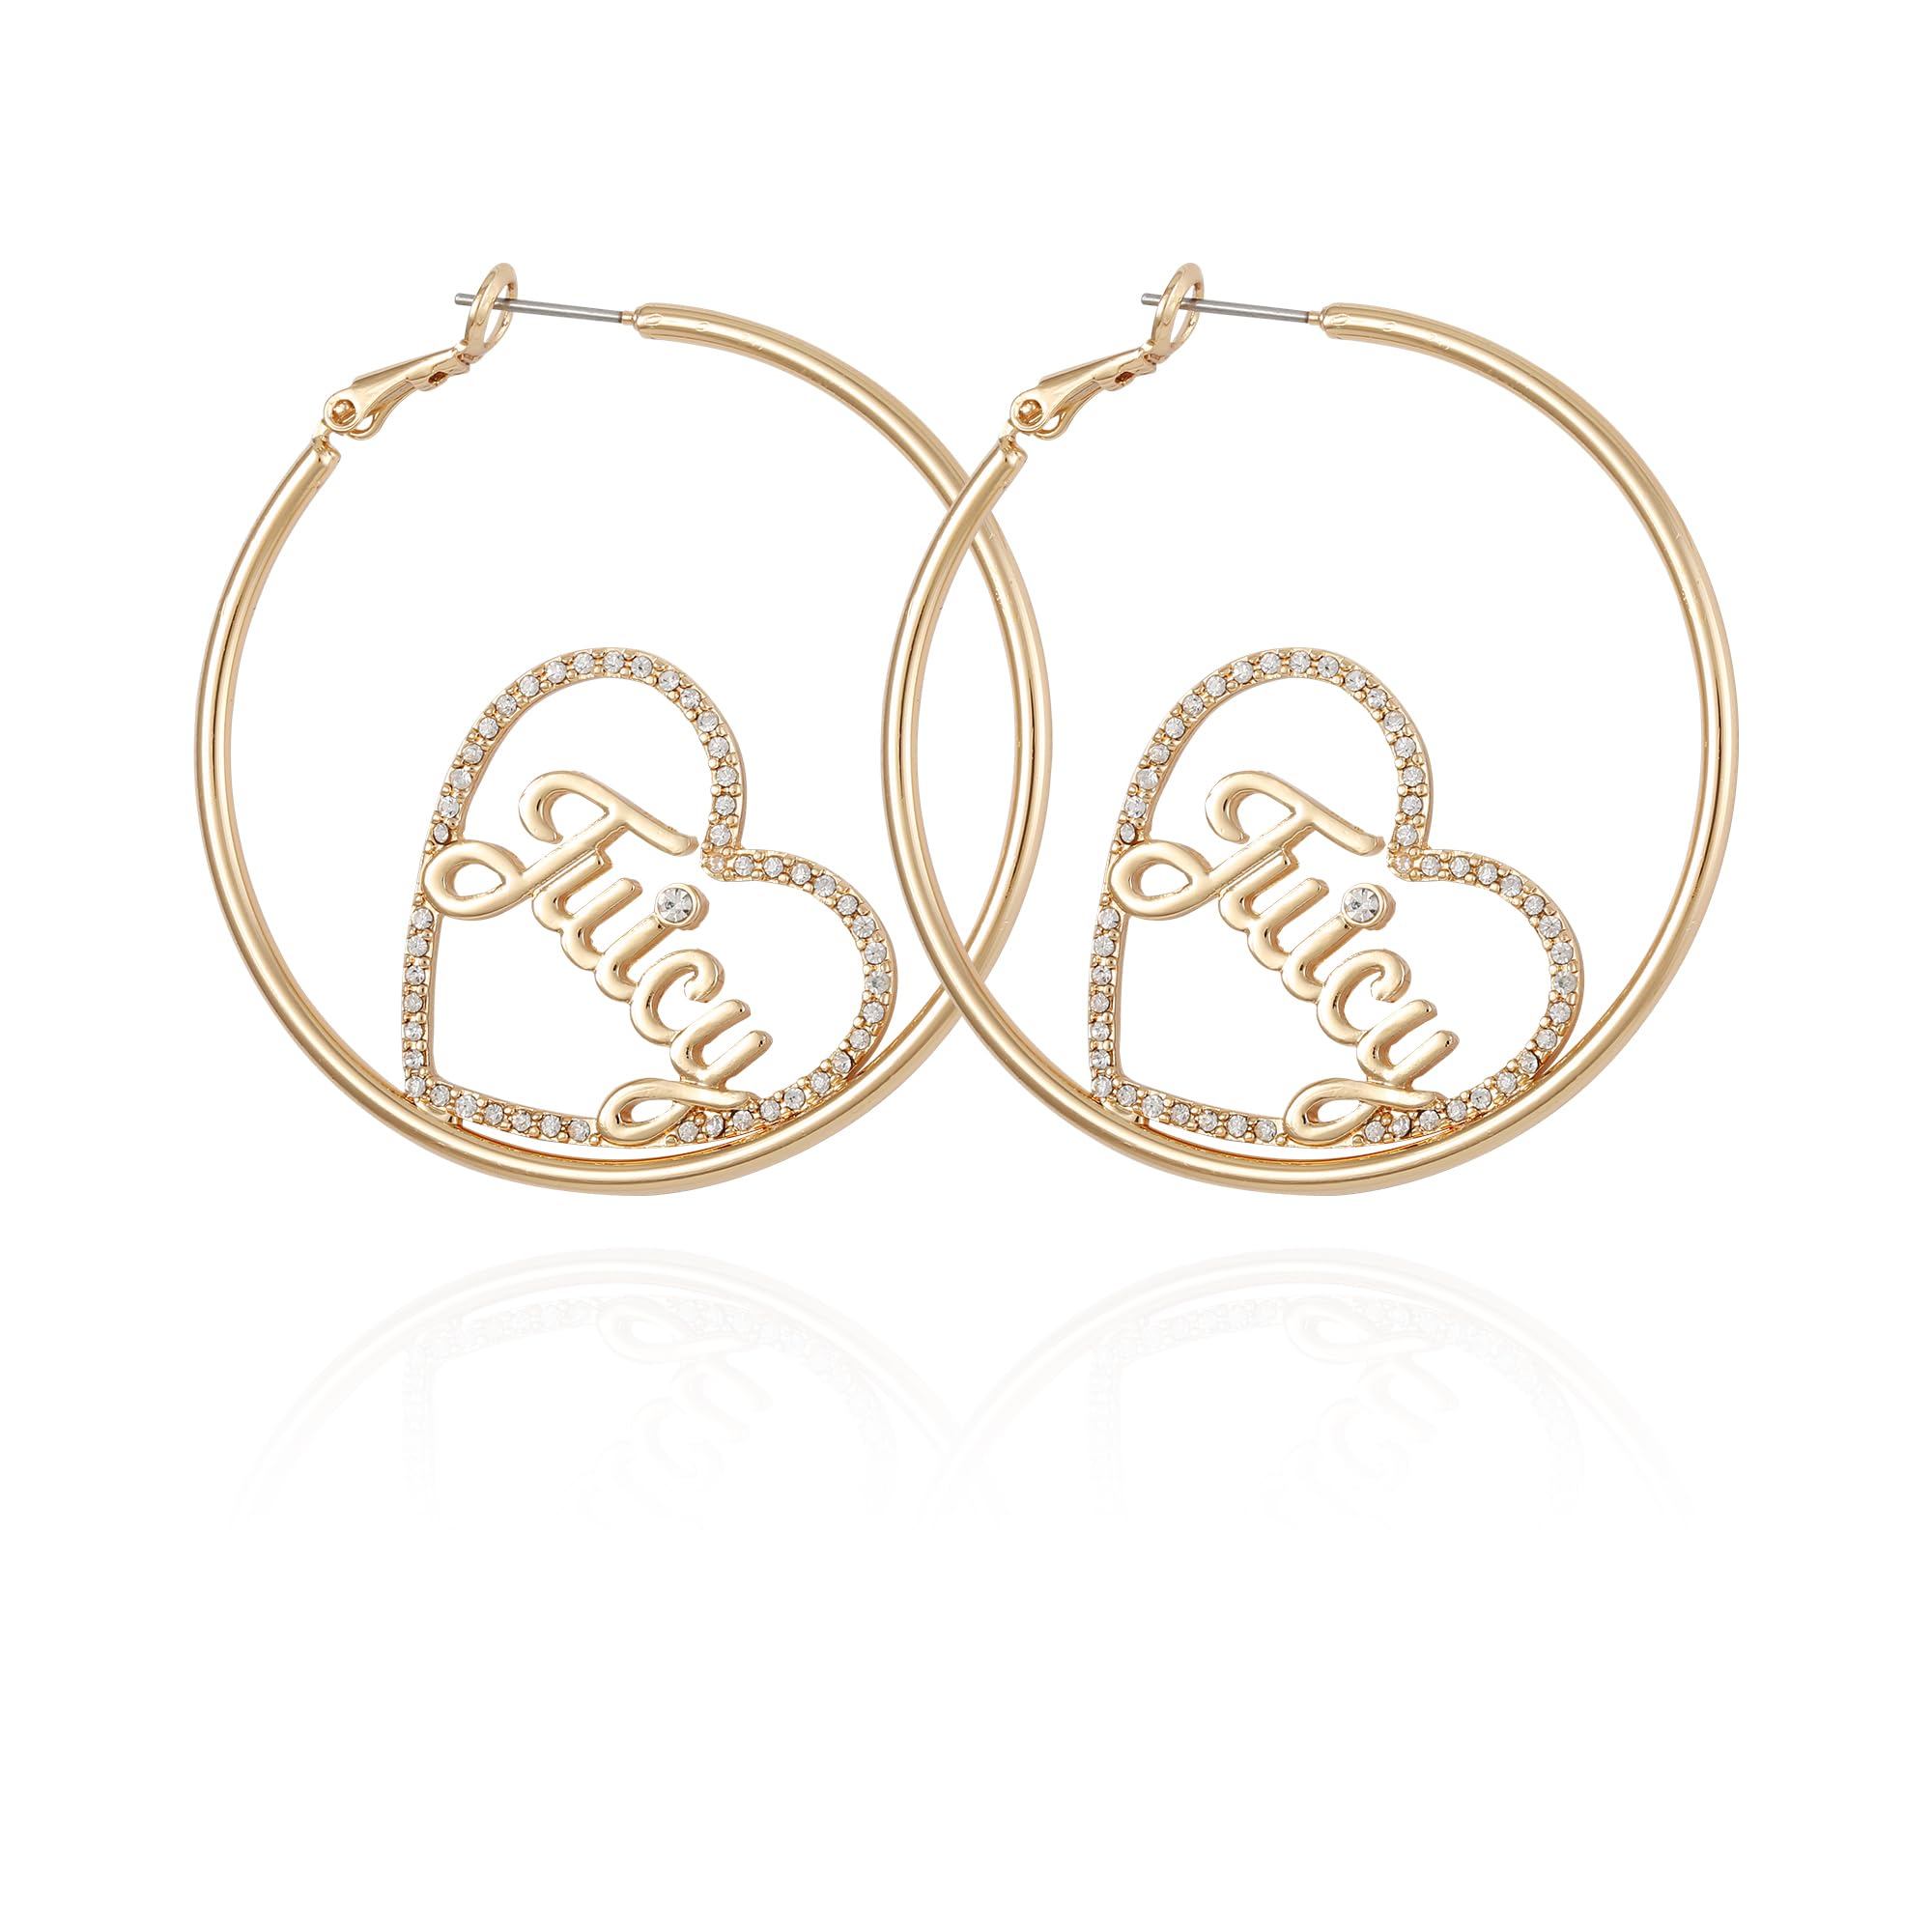 Juicy Couture Goldtone Heart and Signature Logo Hoop Earrings For Women